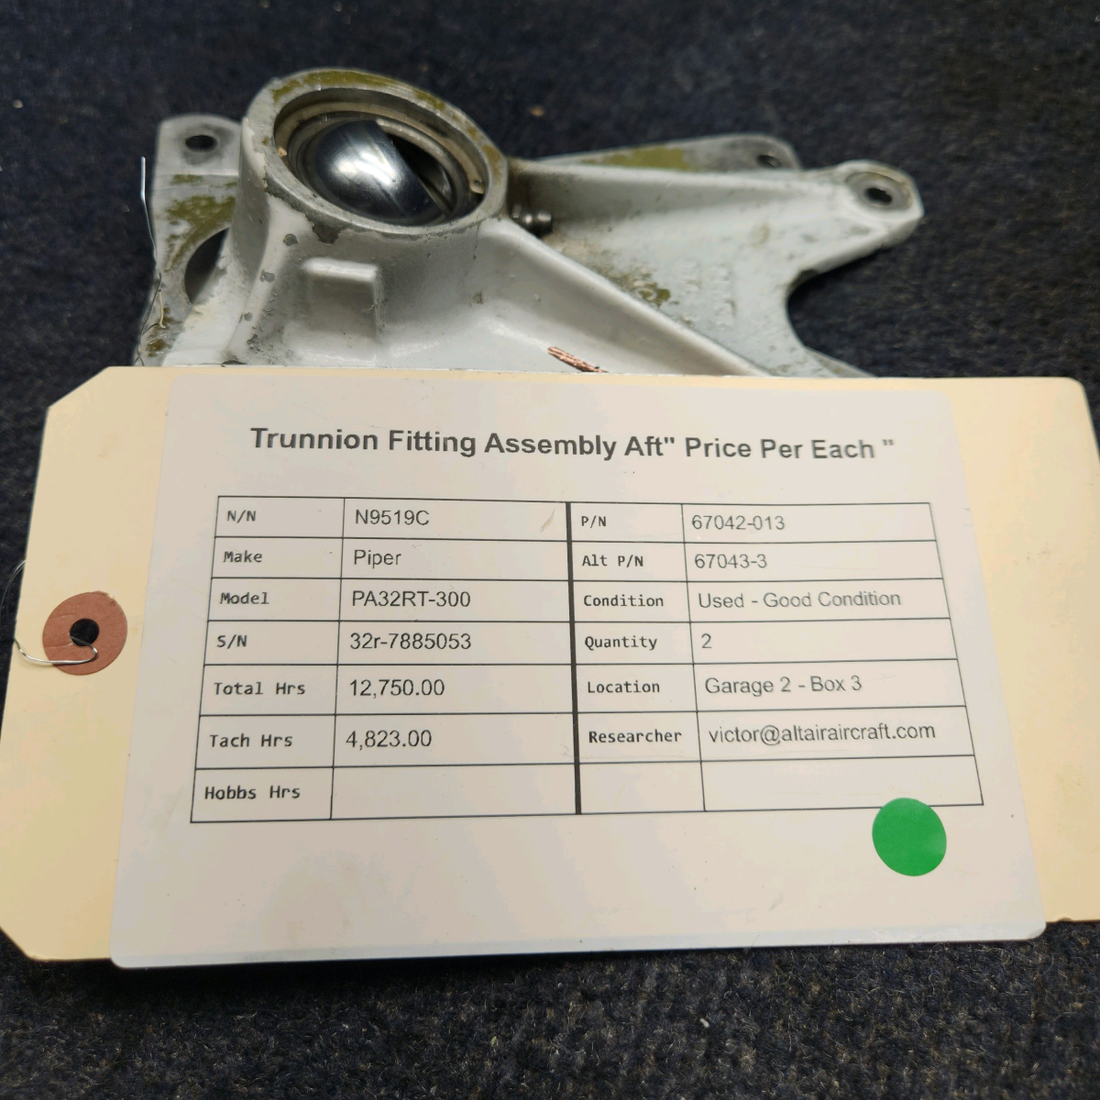 Used aircraft parts for sale, 67042-013 Piper PA32RT-300 TRUNNION FITTING ASSEMBLY AFT" PRICE PER EACH "